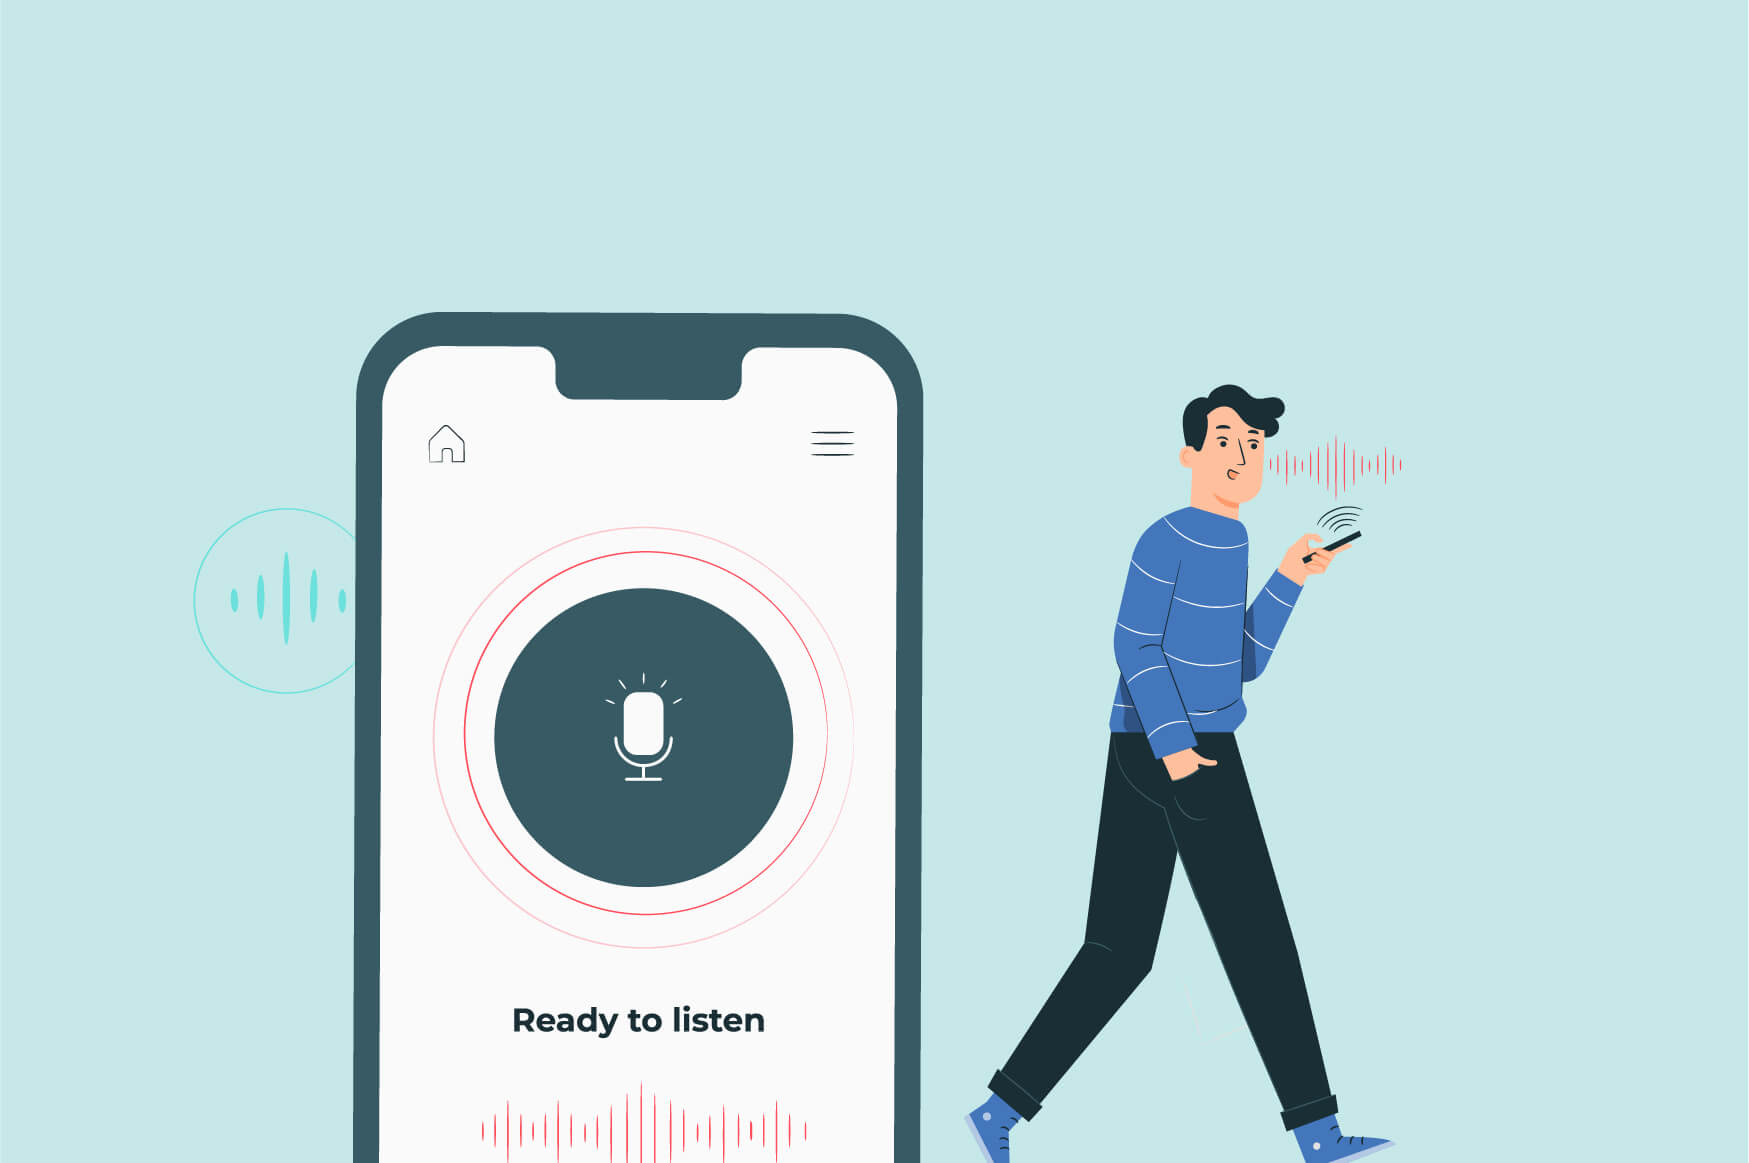 voice recognition technology in PerfectionGeeks